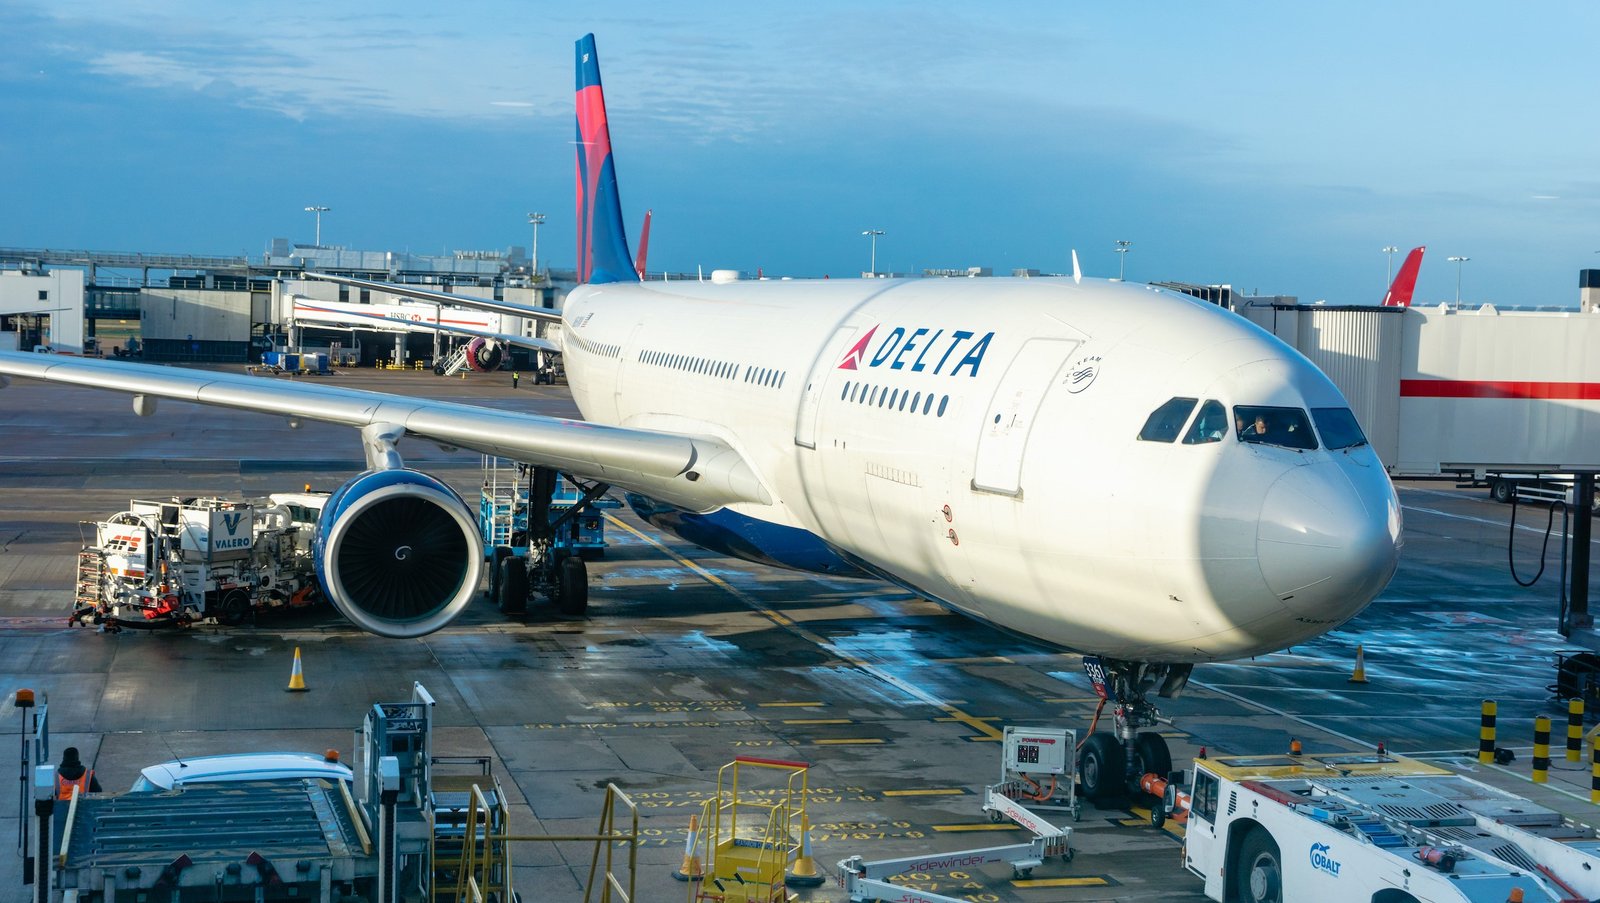 SWOT analysis of Delta Airlines